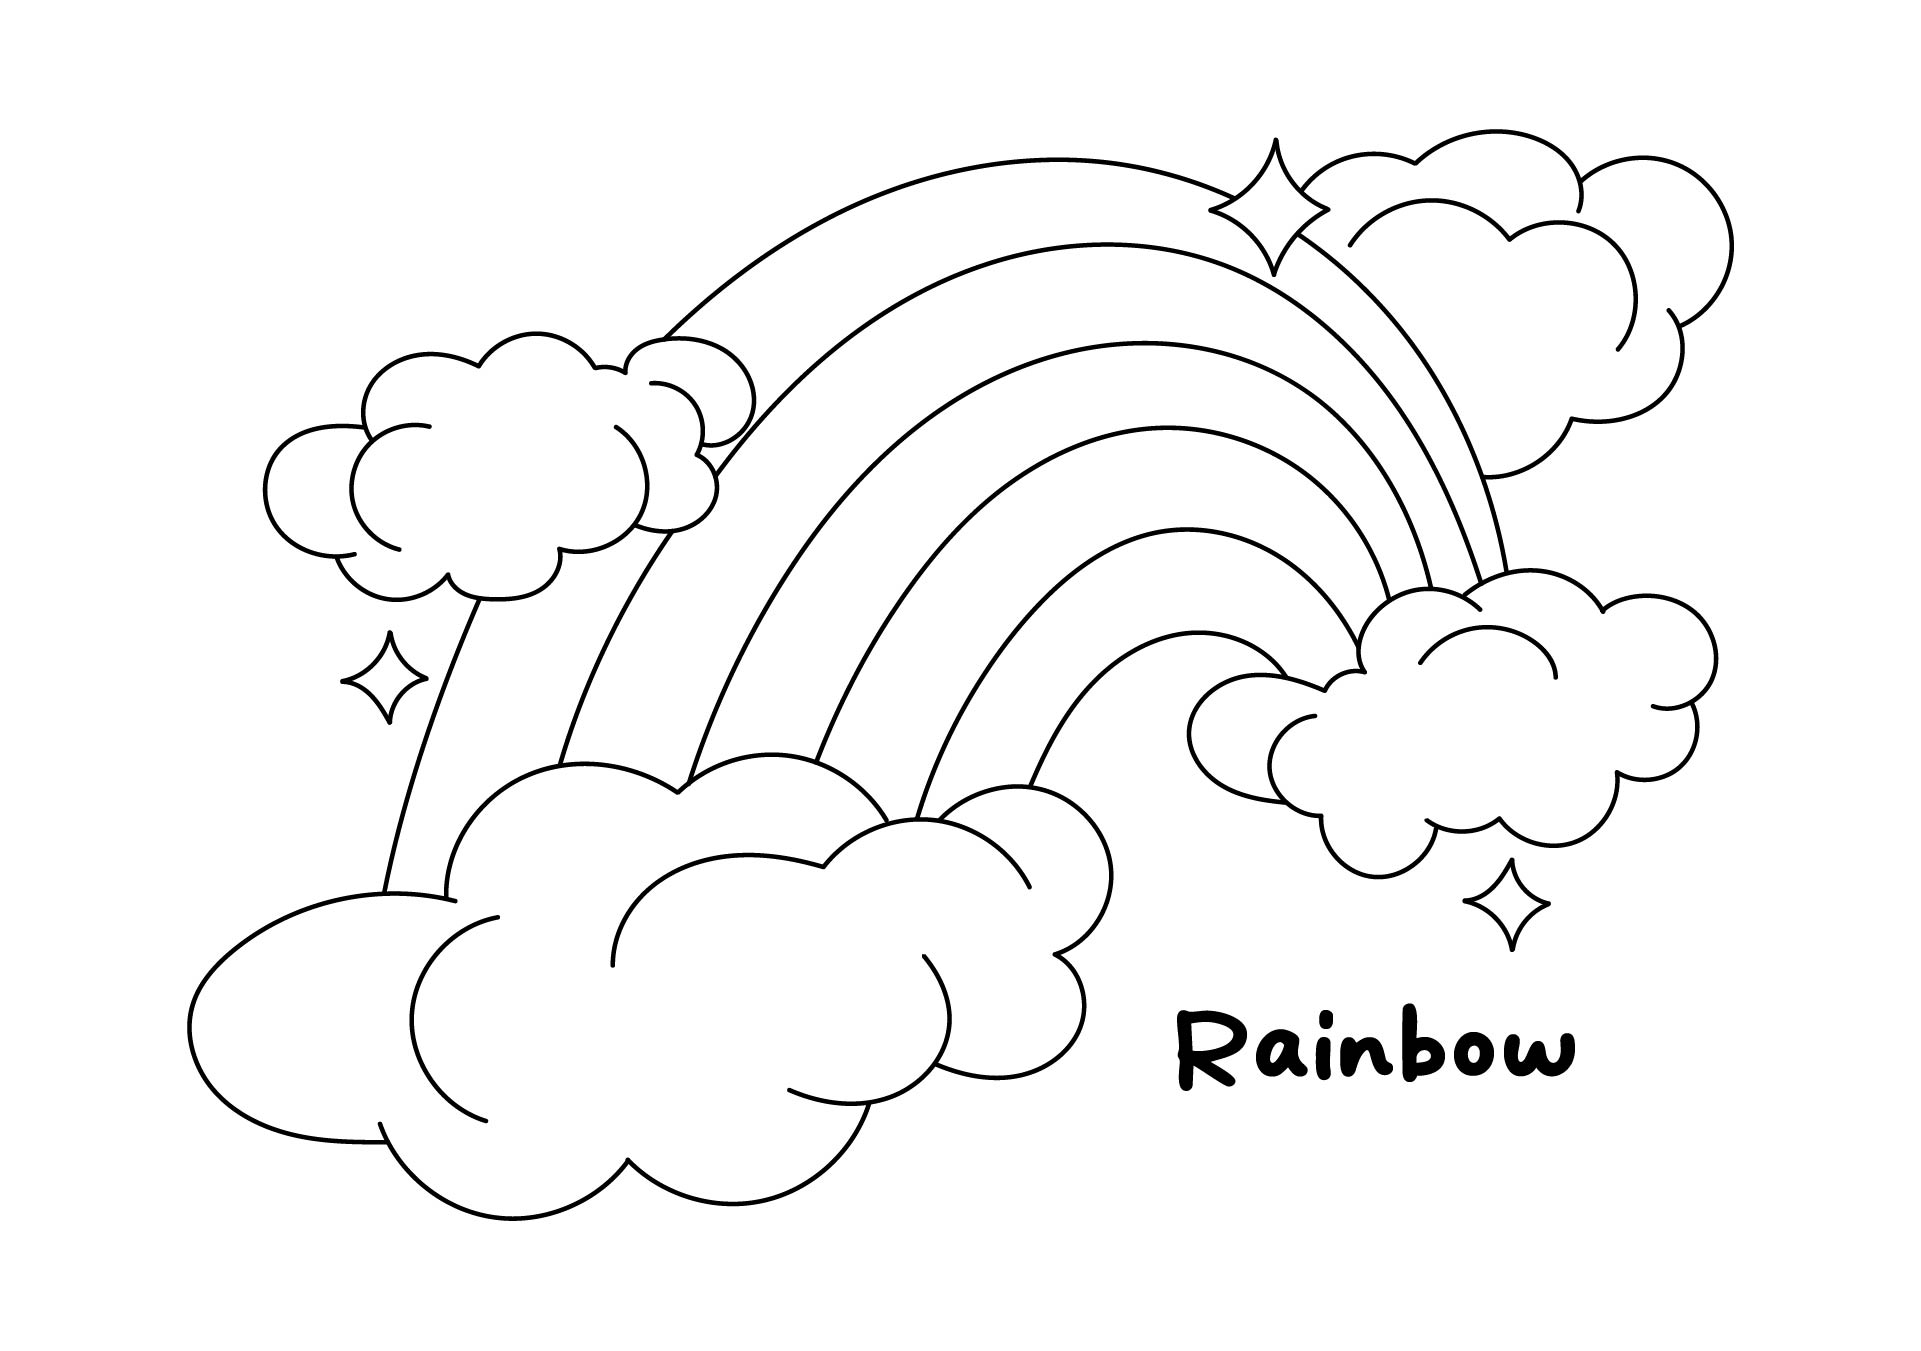  Printable Rainbow Coloring Pages